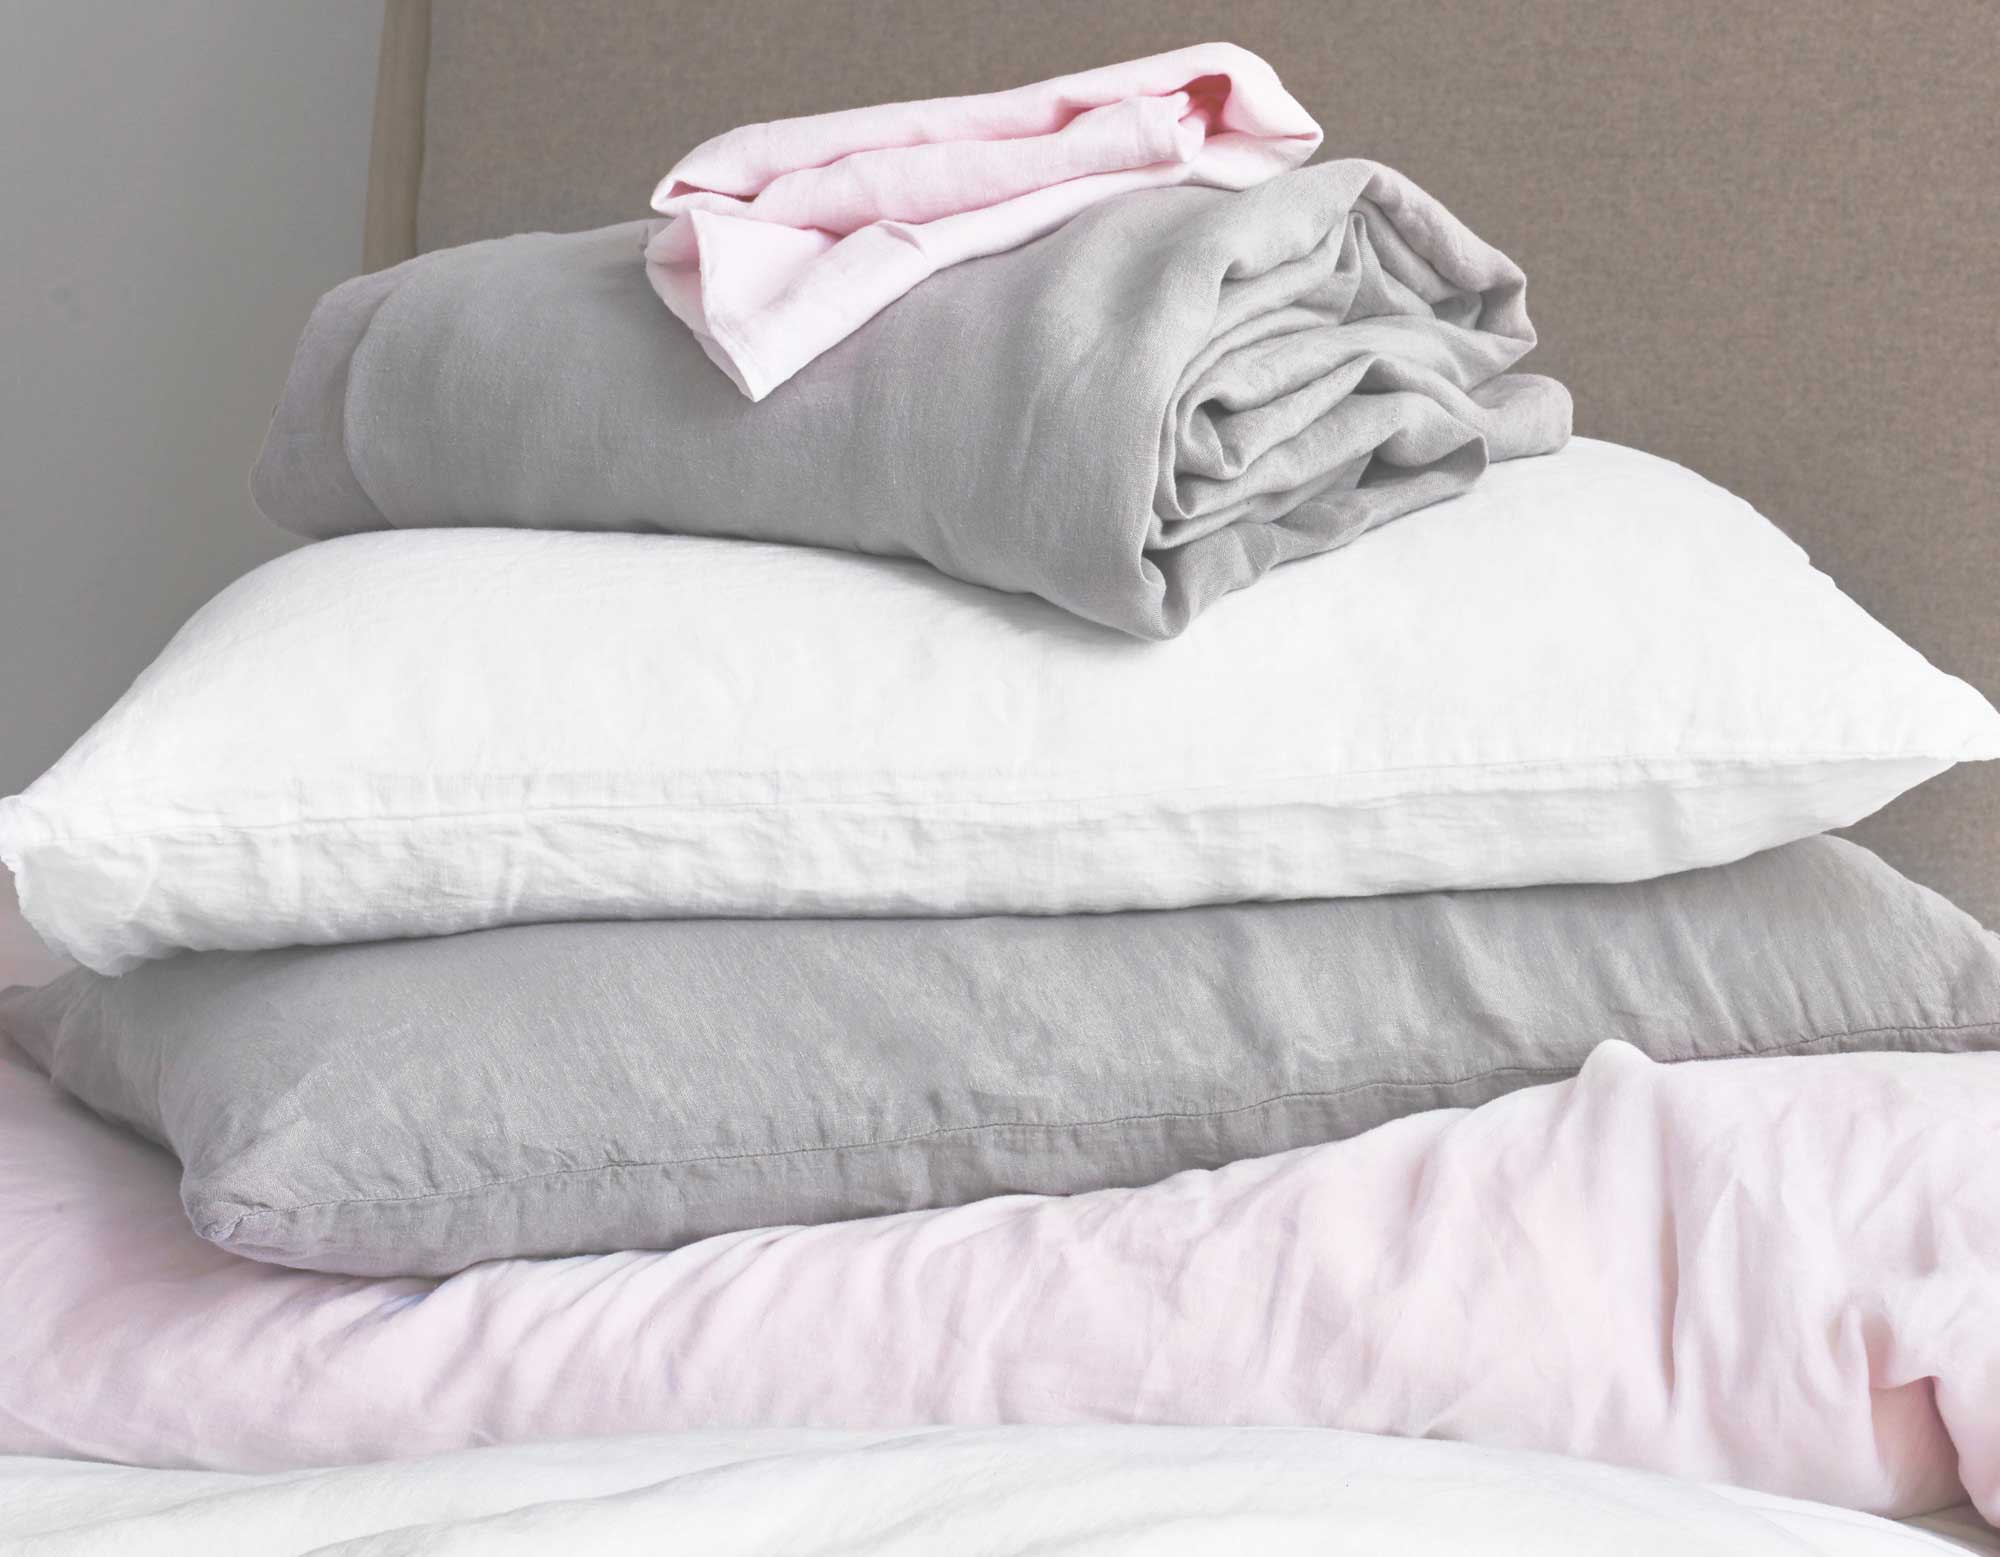 Pink, grey and white king size bed linen in a pile